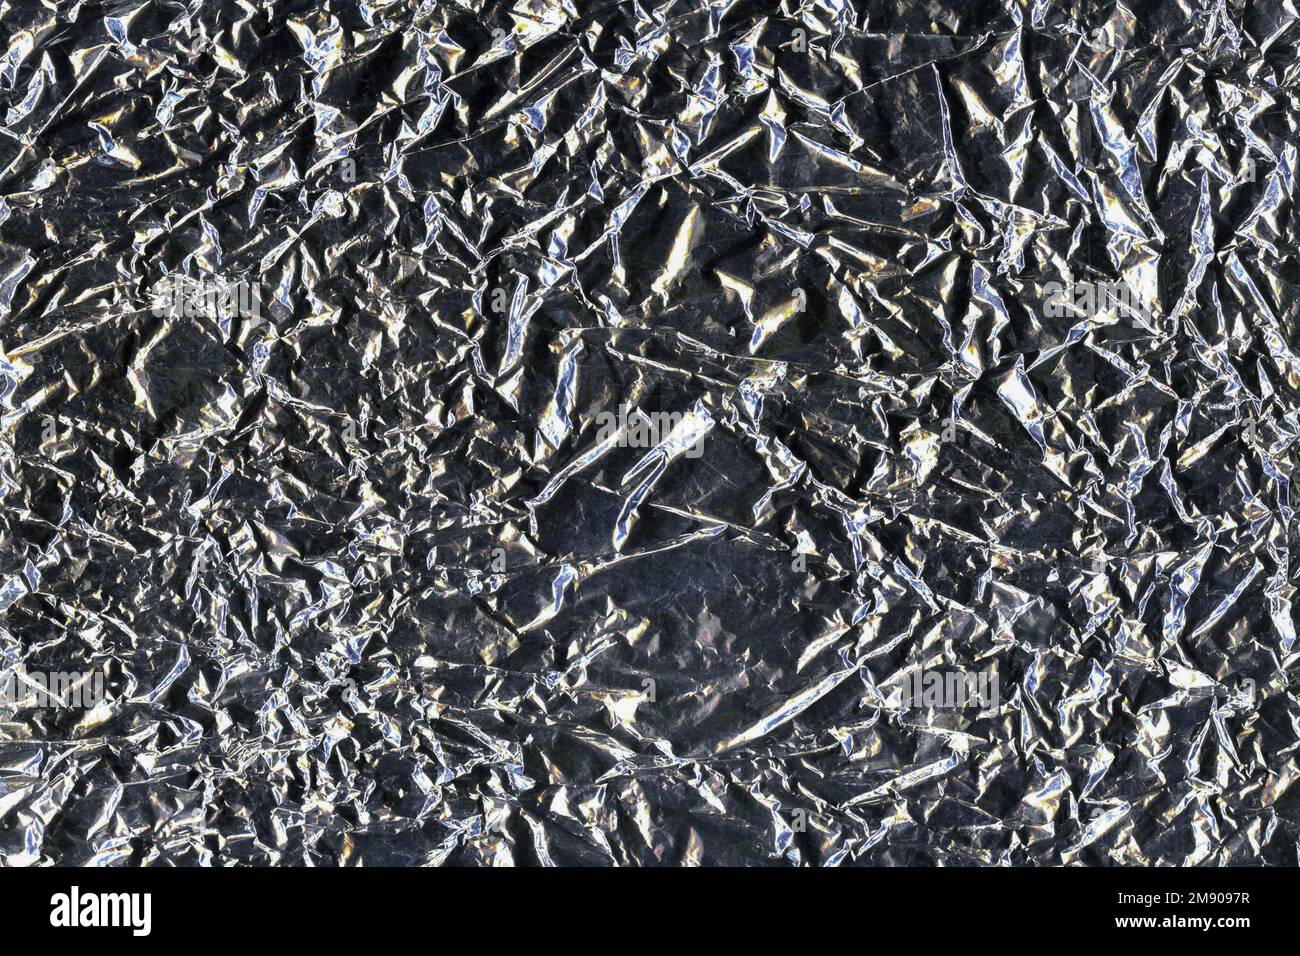 https://c8.alamy.com/comp/2M9097R/silver-crumpled-aluminum-foil-flat-background-and-texture-shiny-surface-2M9097R.jpg